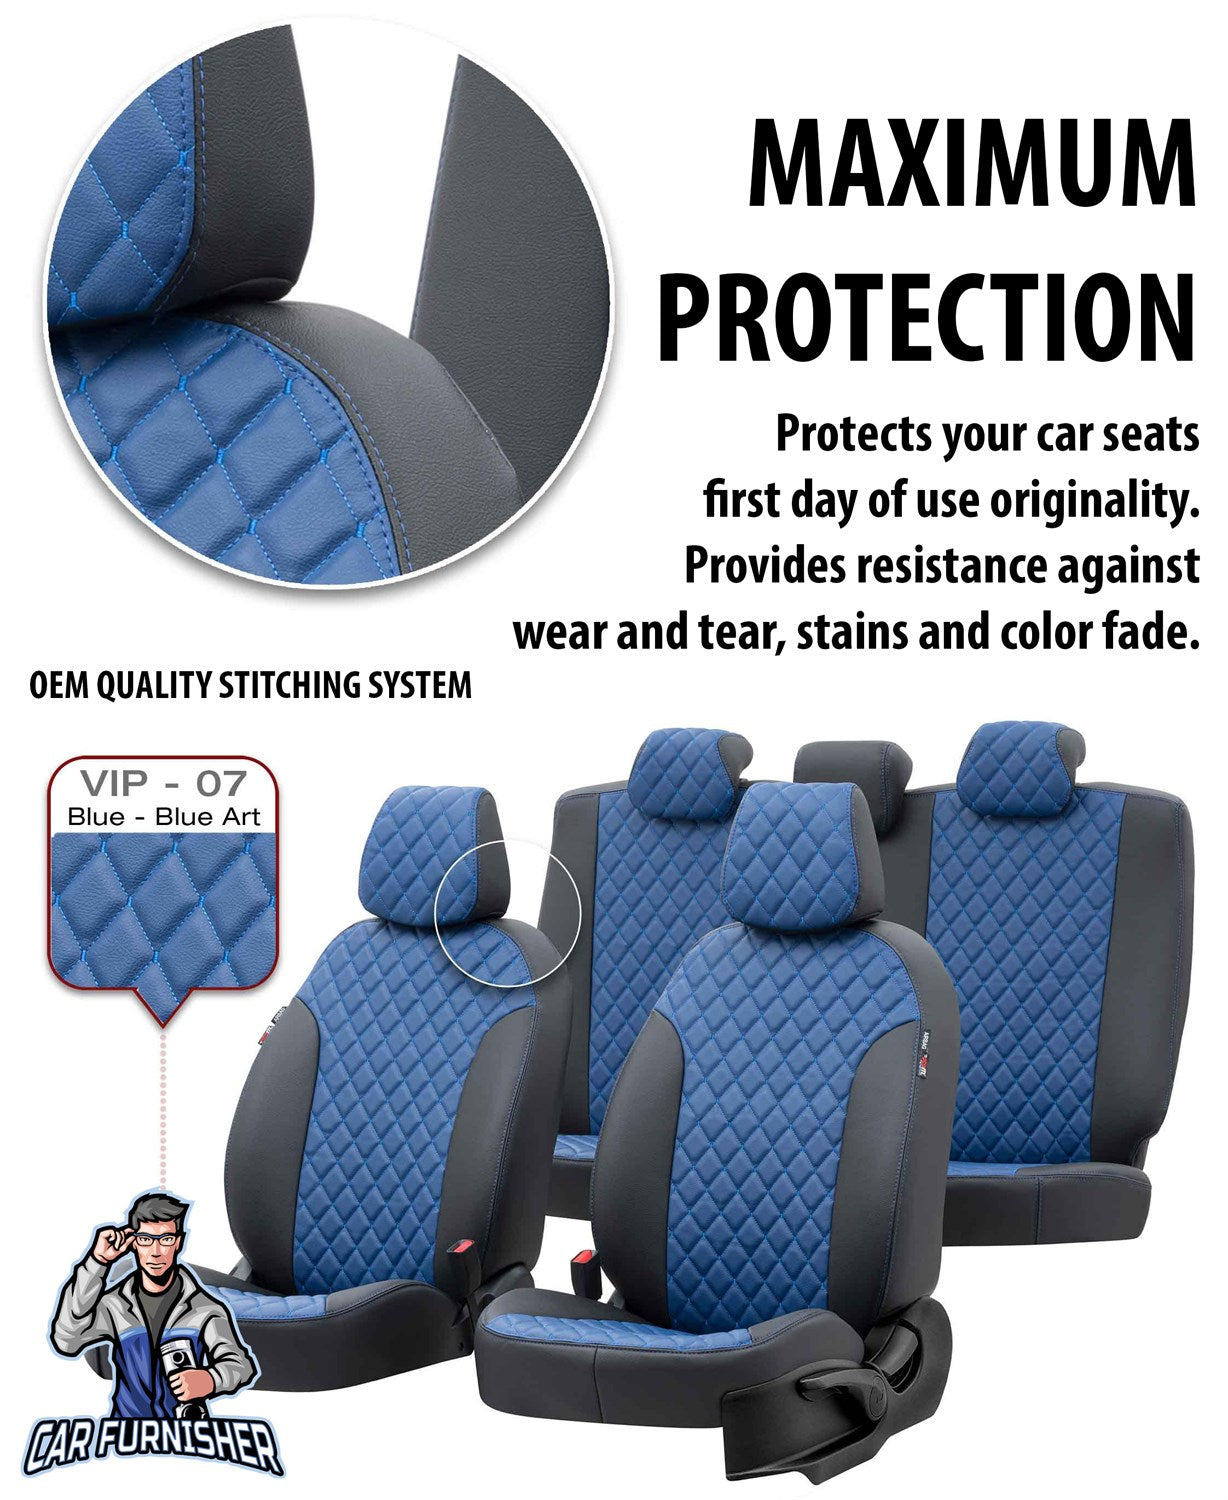 Volkswagen Caravelle Seat Cover Madrid Leather Design Dark Gray Leather